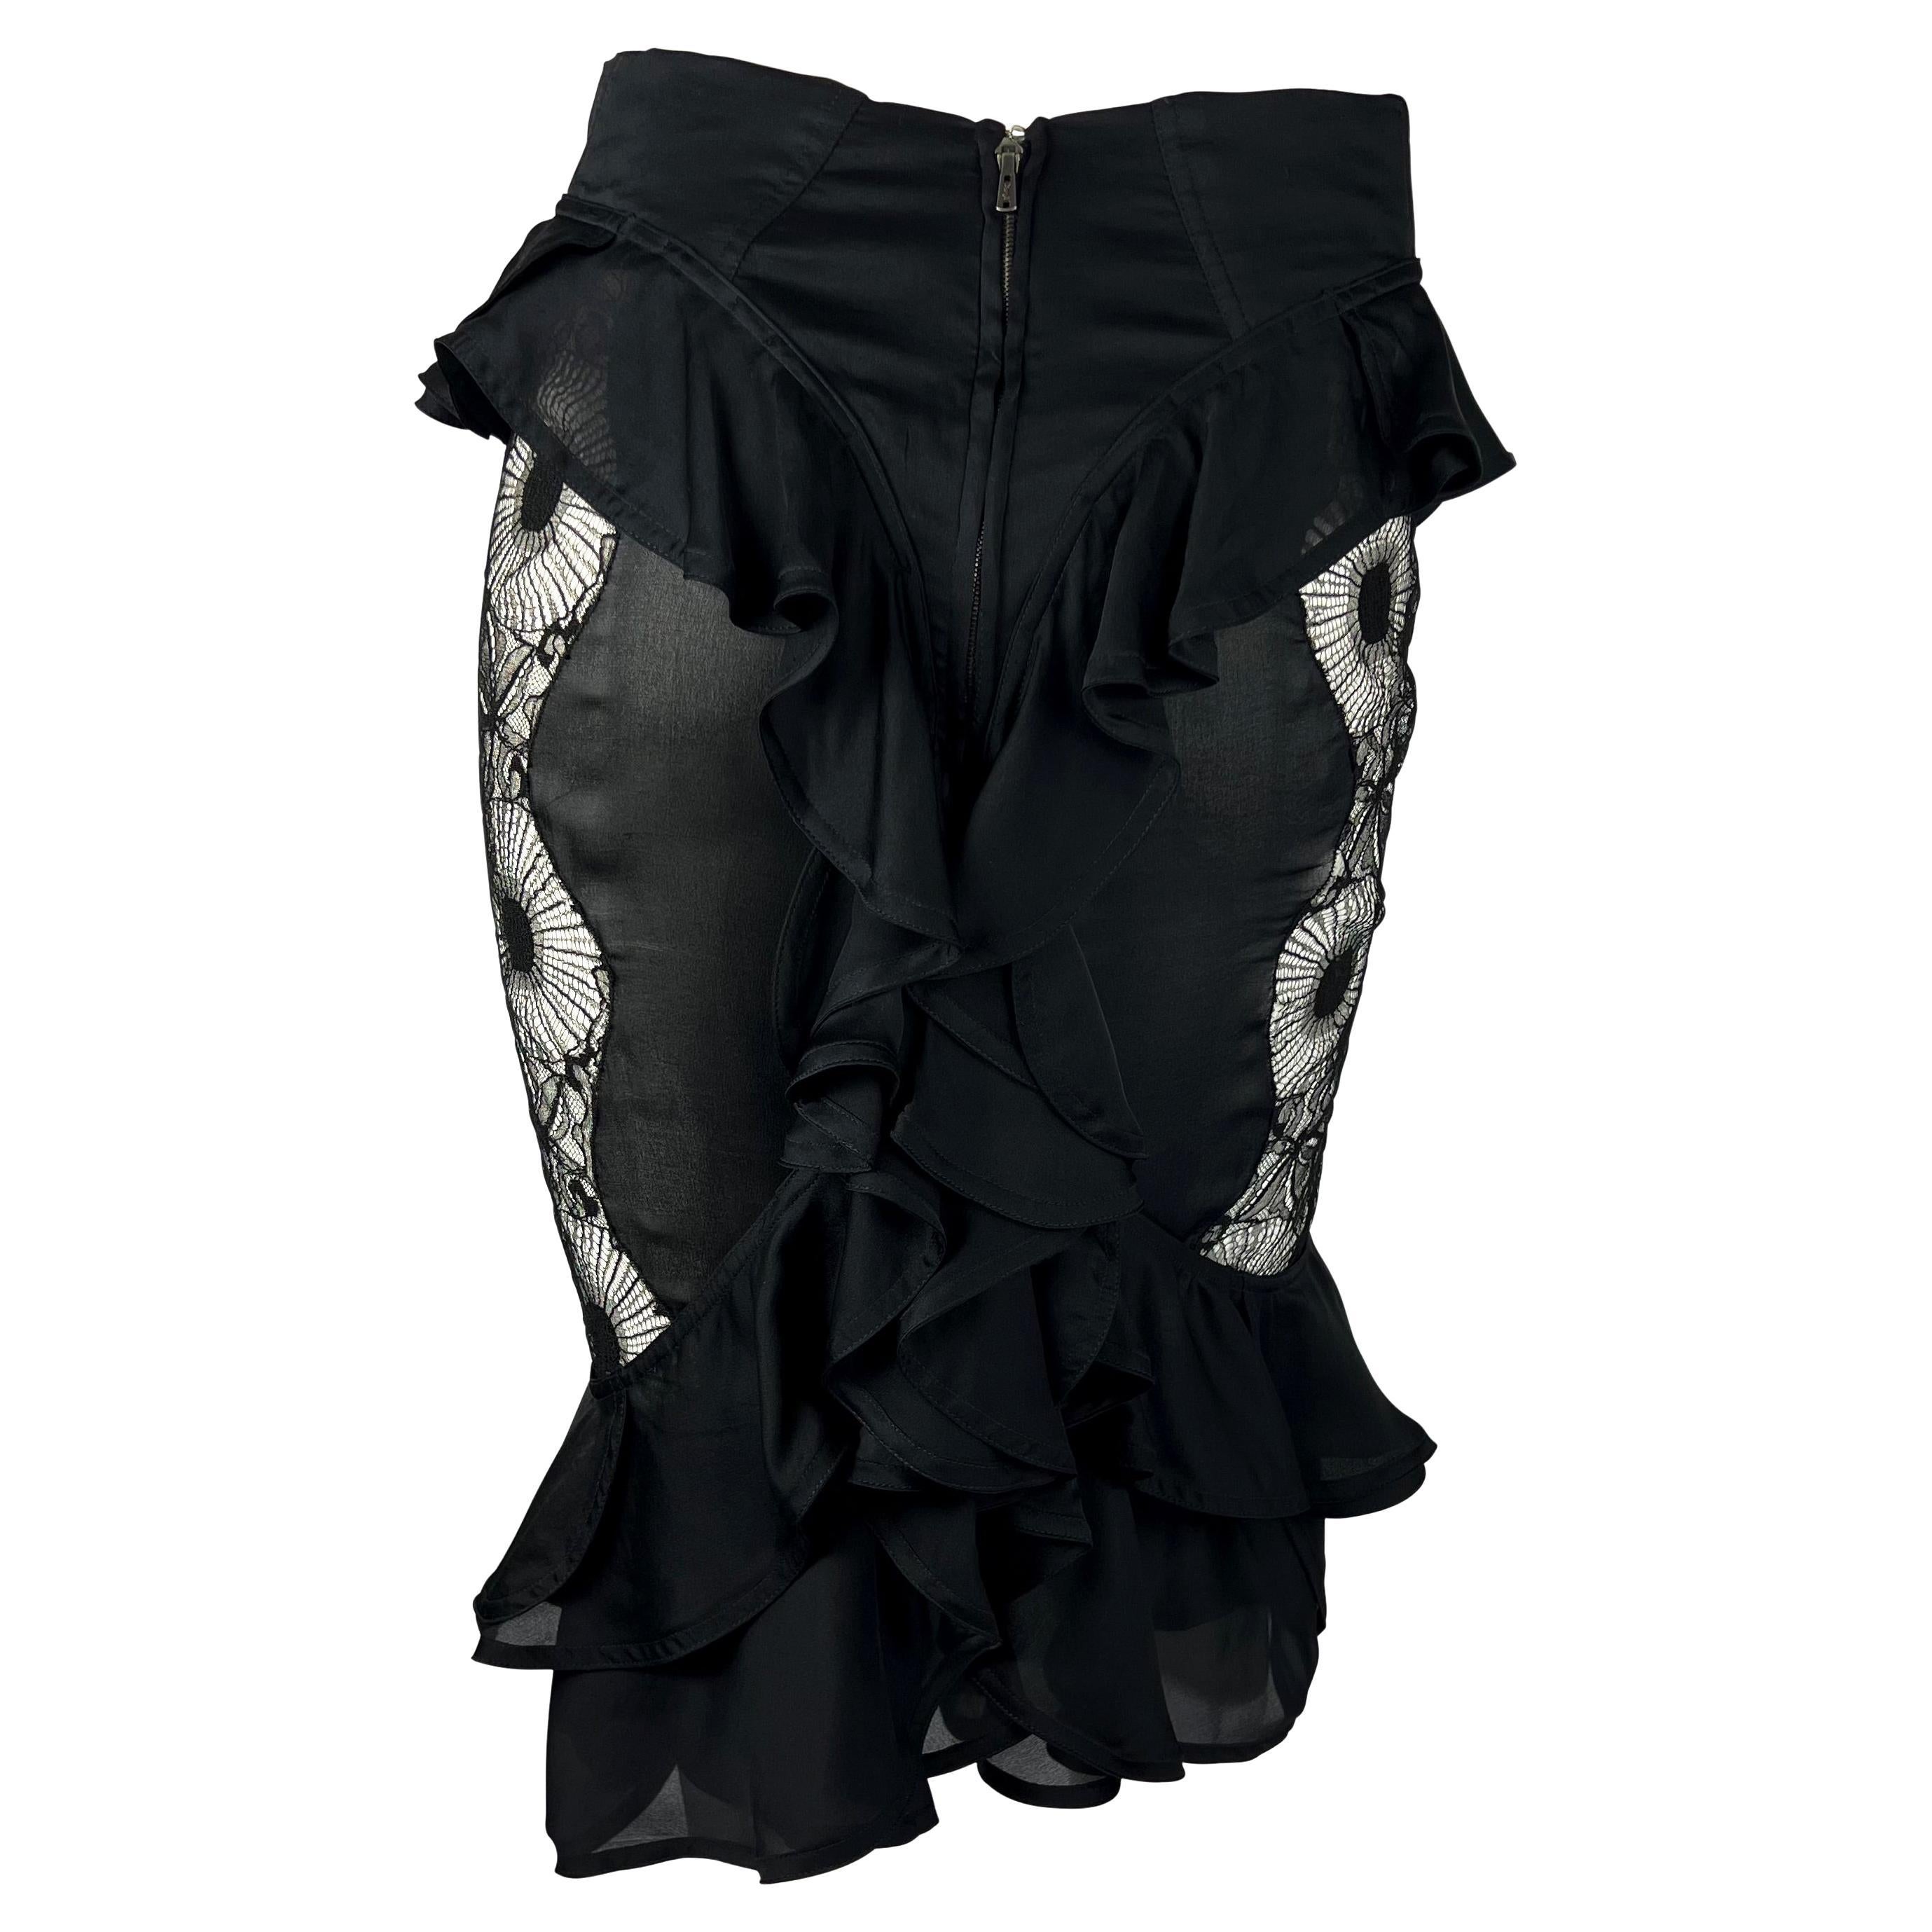 F/W 2003 Yves Saint Laurent by Tom Ford Sheer Lace Satin Ruffled Top Skirt Set For Sale 10